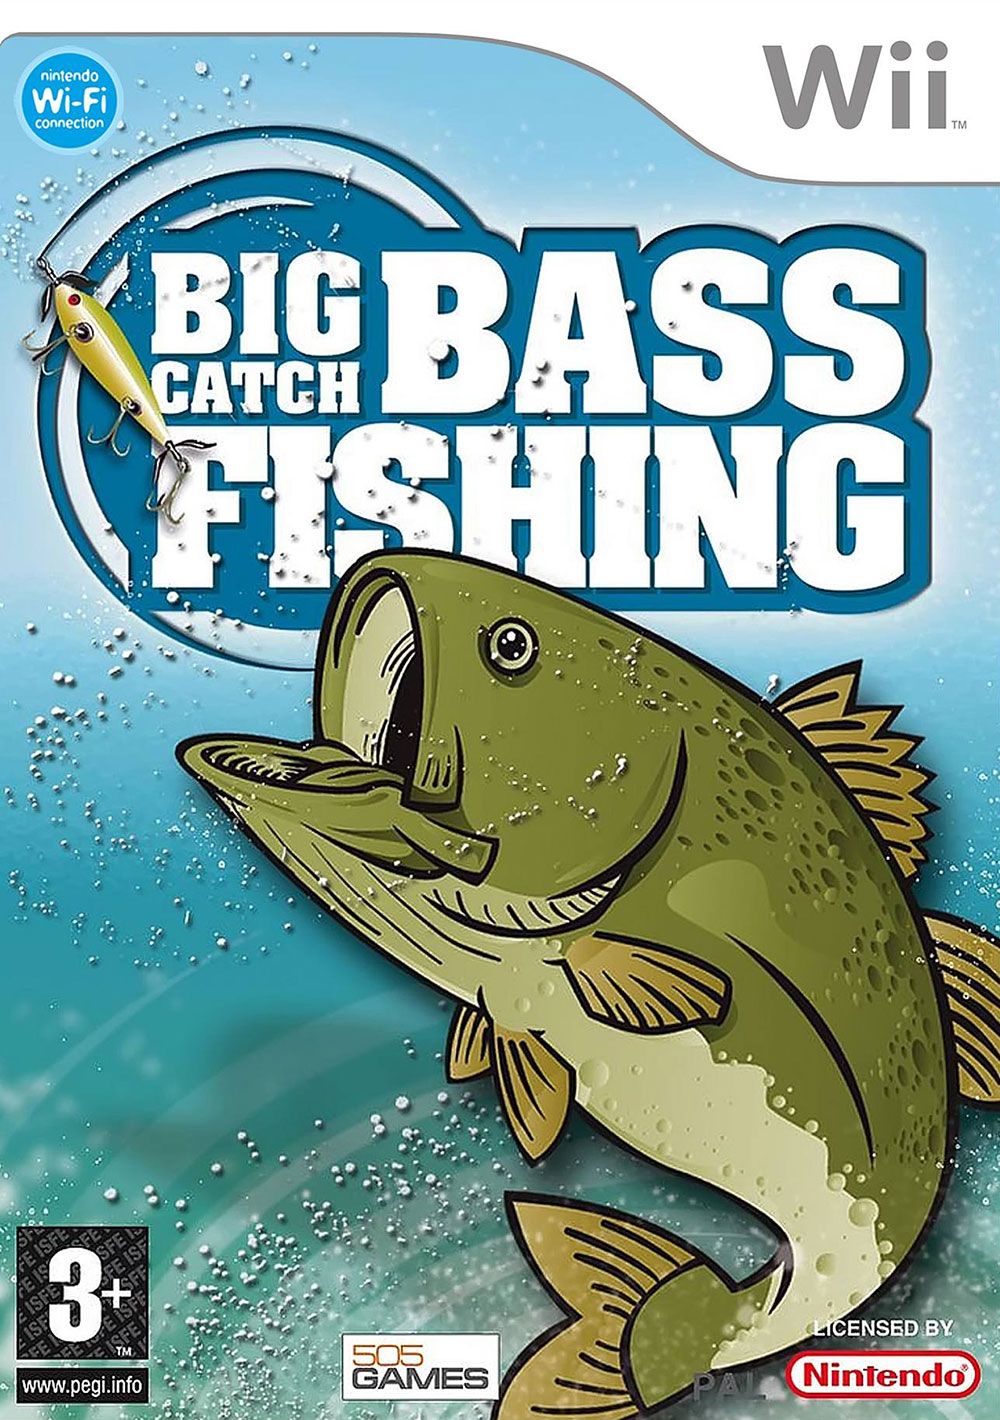 Big Catch: Bass Fishing (Wii)(Pwned), Nintendo Wii, Buy from Pwned Games  with confidence.